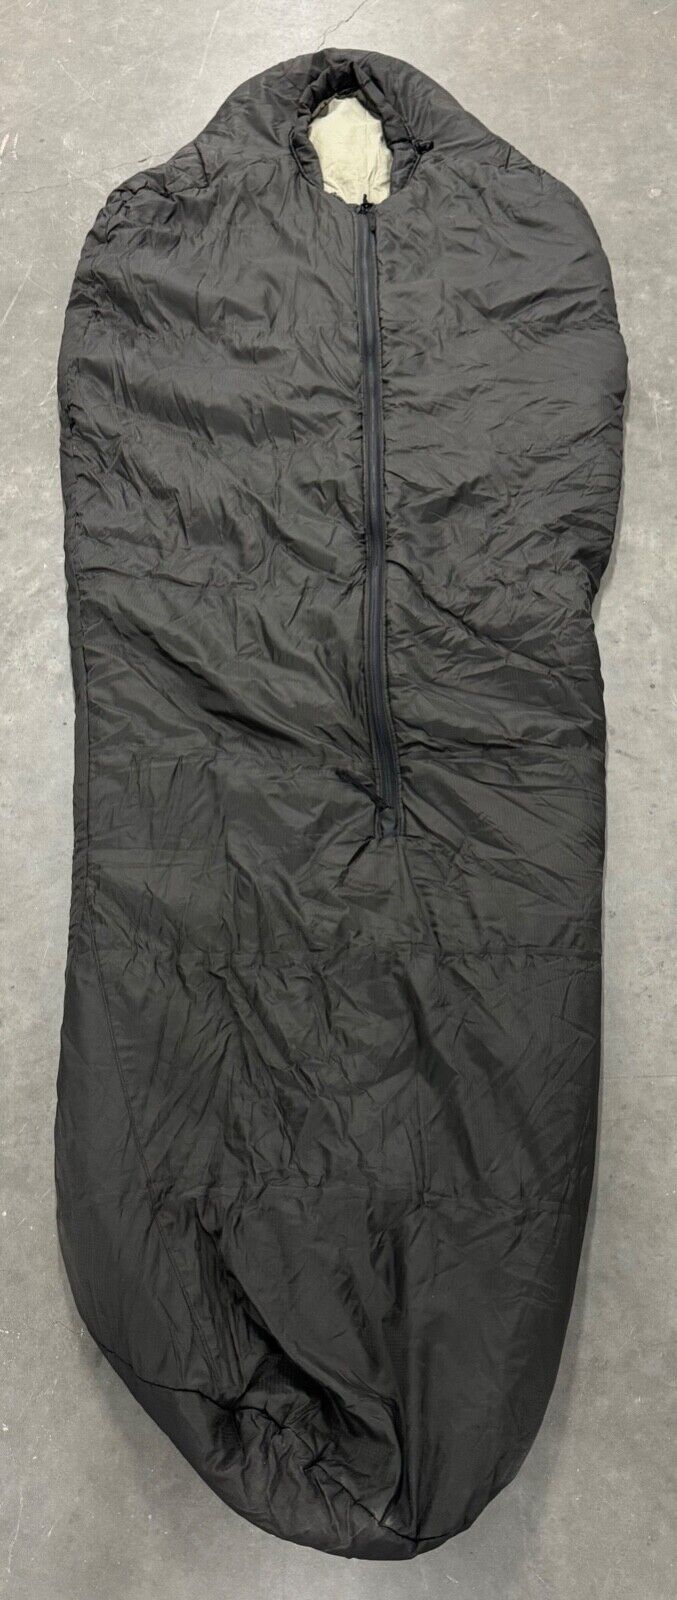 USMC Military Extreme Cold Weather Outer Sleeping Bag Black NSN:8465-01-608-7503